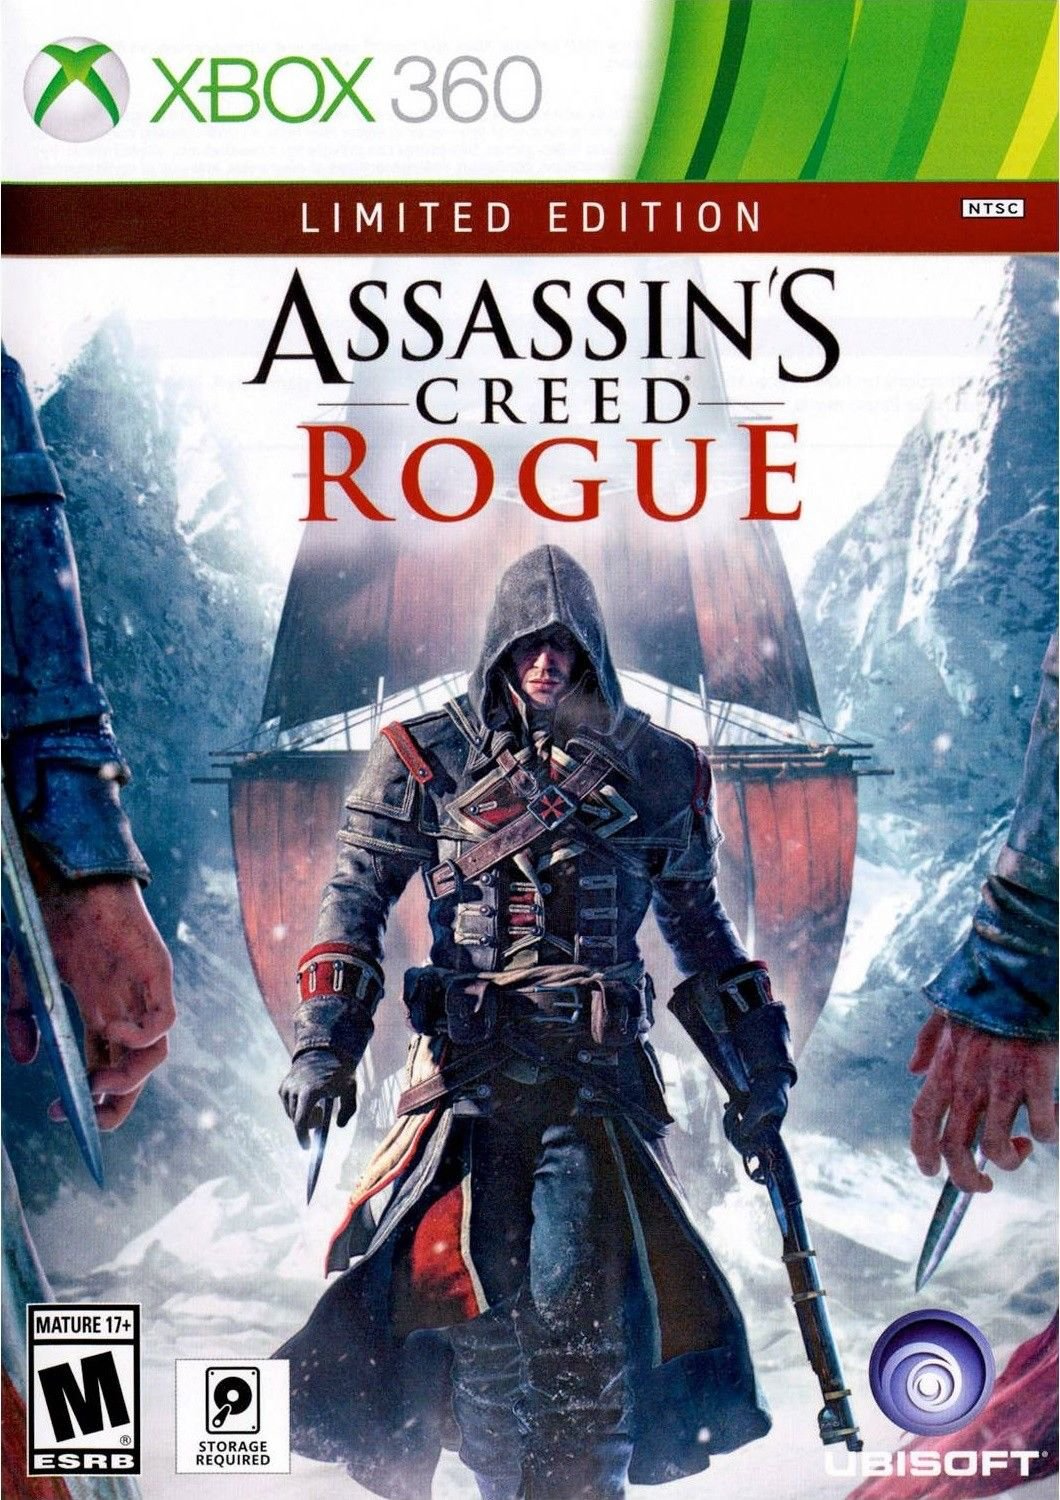 Assassin's Creed: Rogue - Limited Edition - Xbox 360